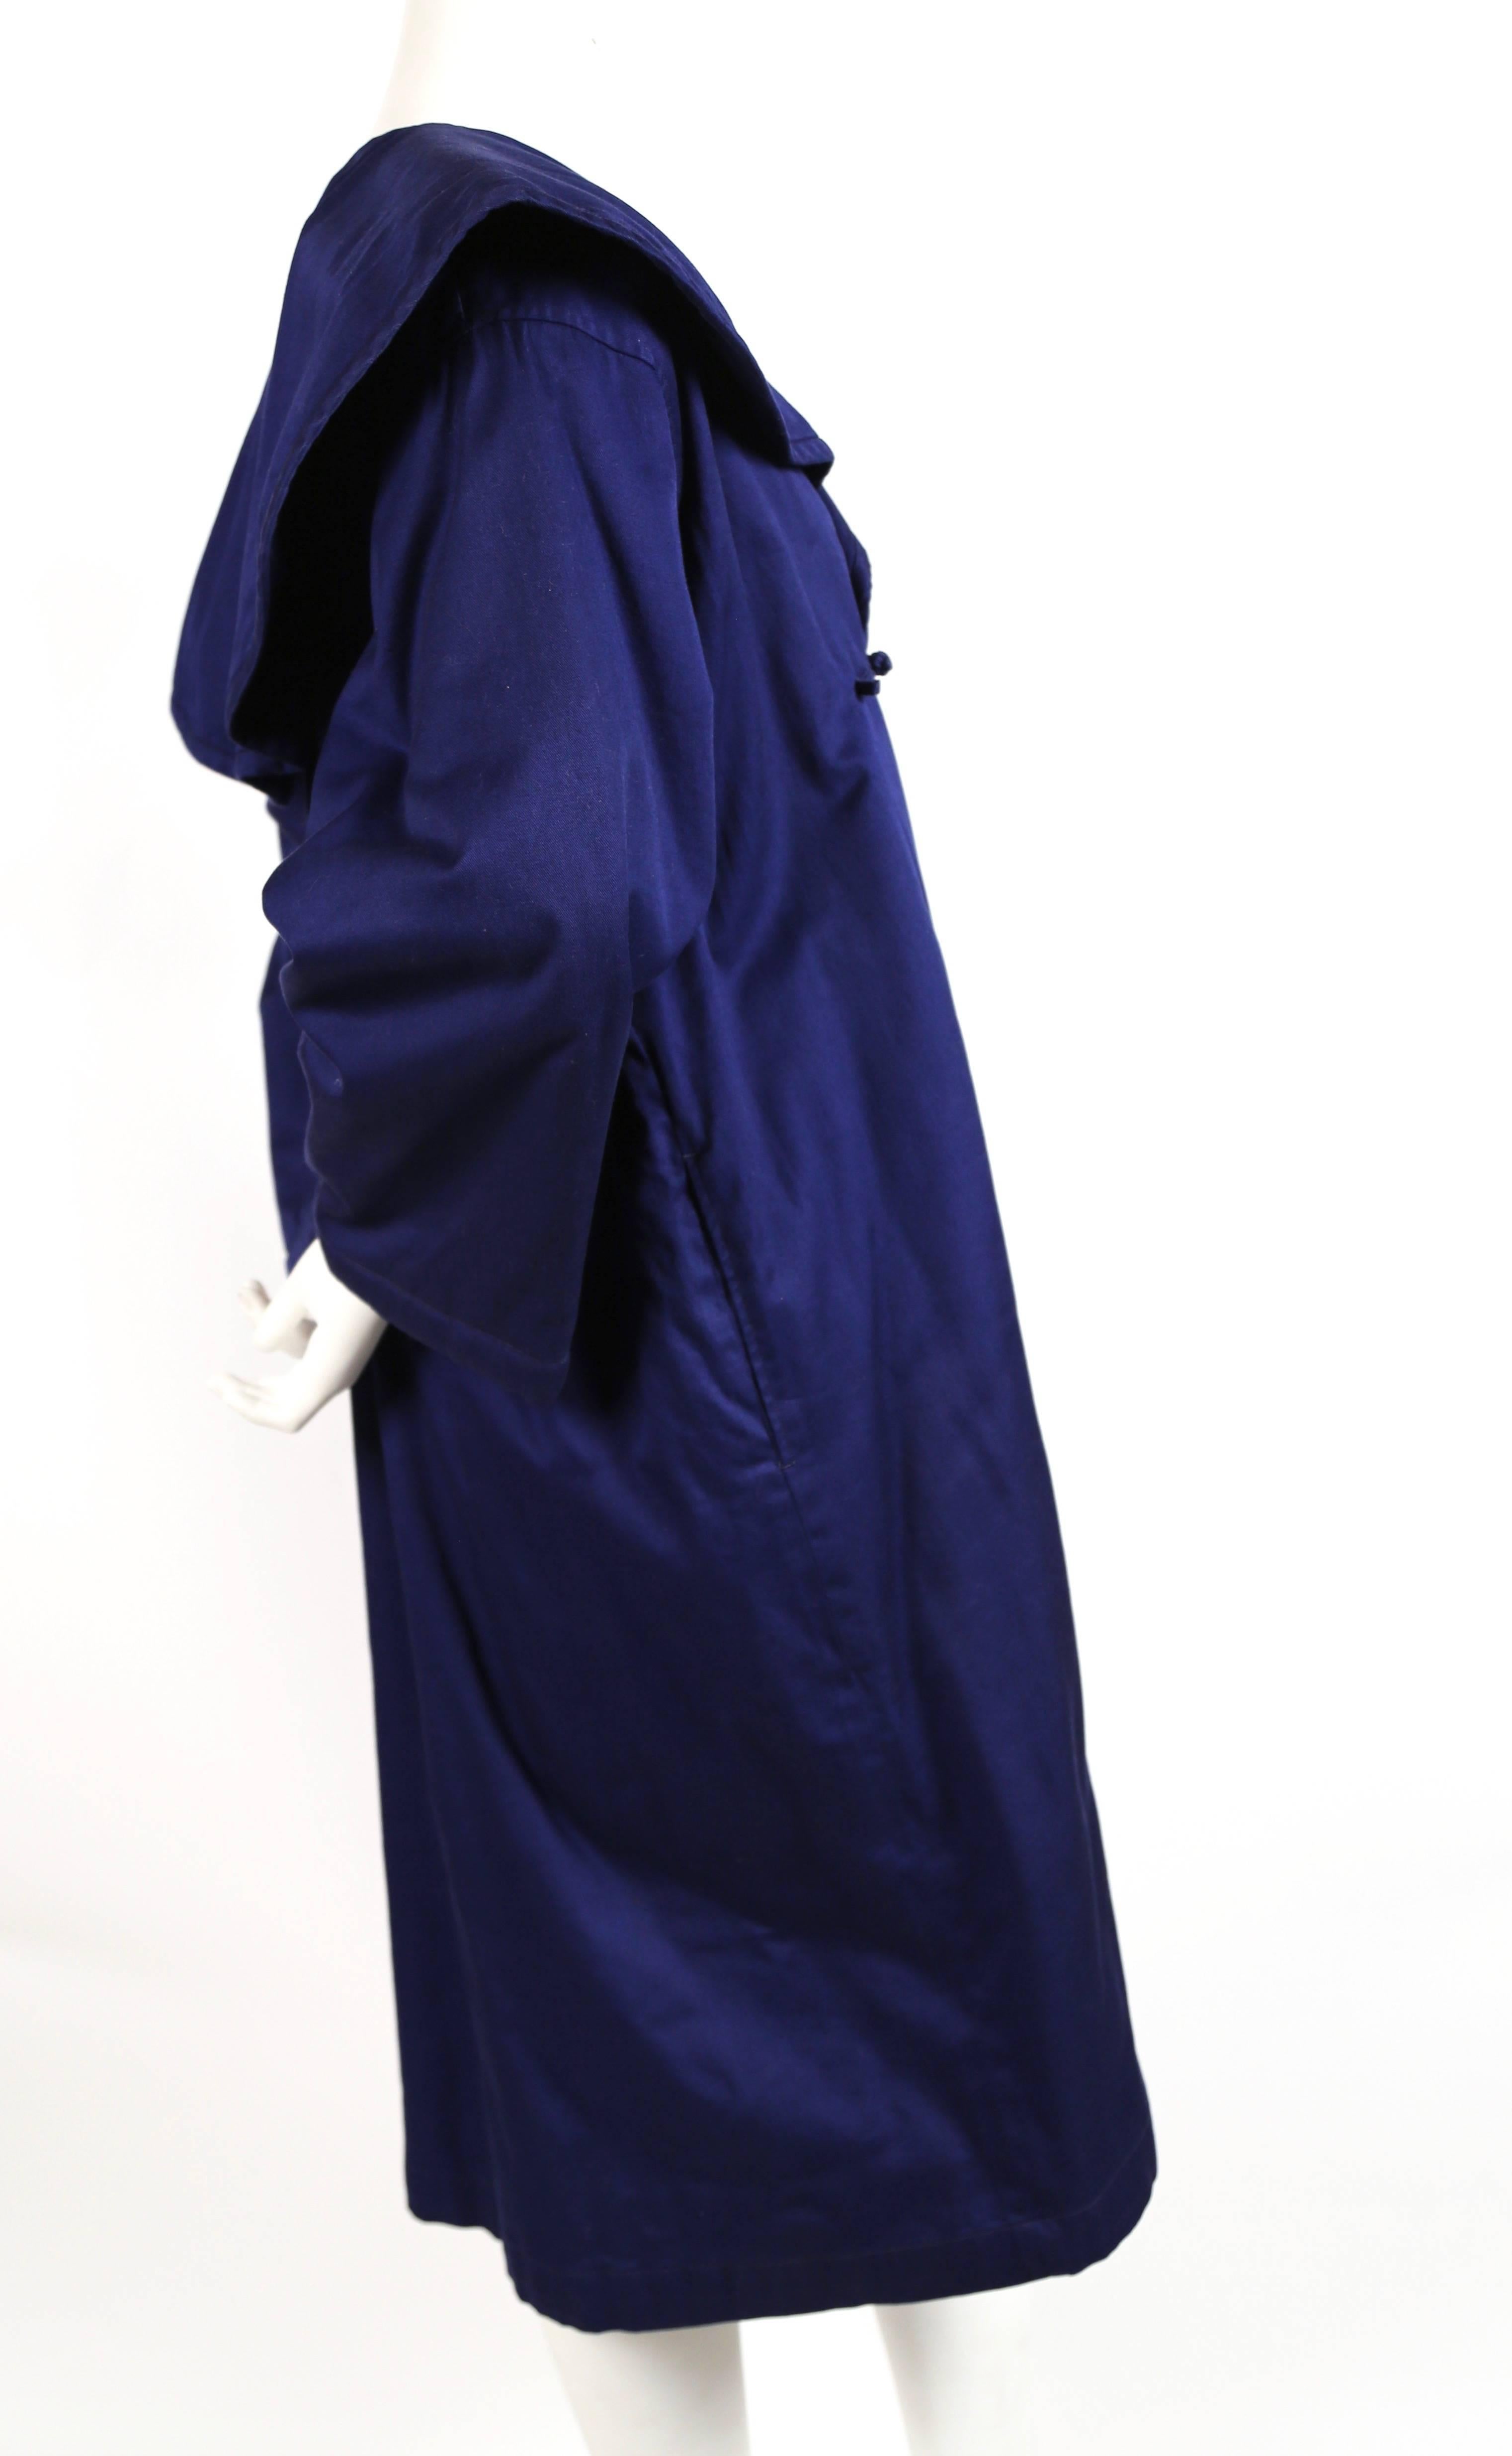 Vivid blue cotton coat with frog closures designed by Rei Kawakubo for Comme Des Garcons 'China' dating to the 1980's. No size is indicated however this has an oversized fit. Approximate measurements taken on outside of coat: shoulder 20